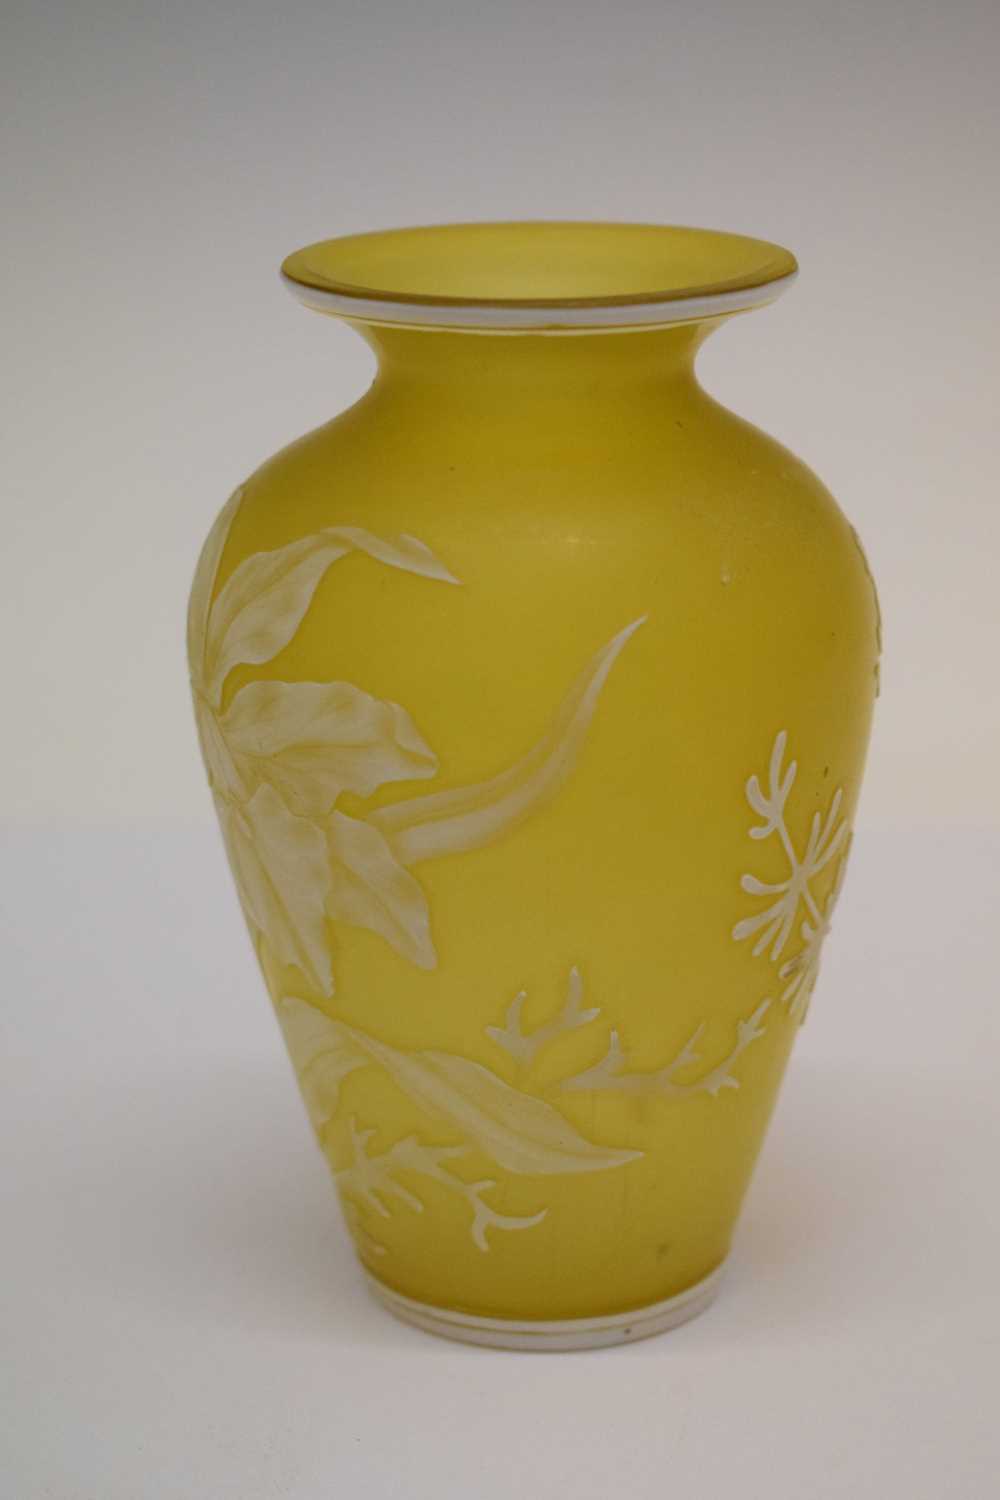 Galle style cameo glass vase with floral decoration - Image 4 of 6